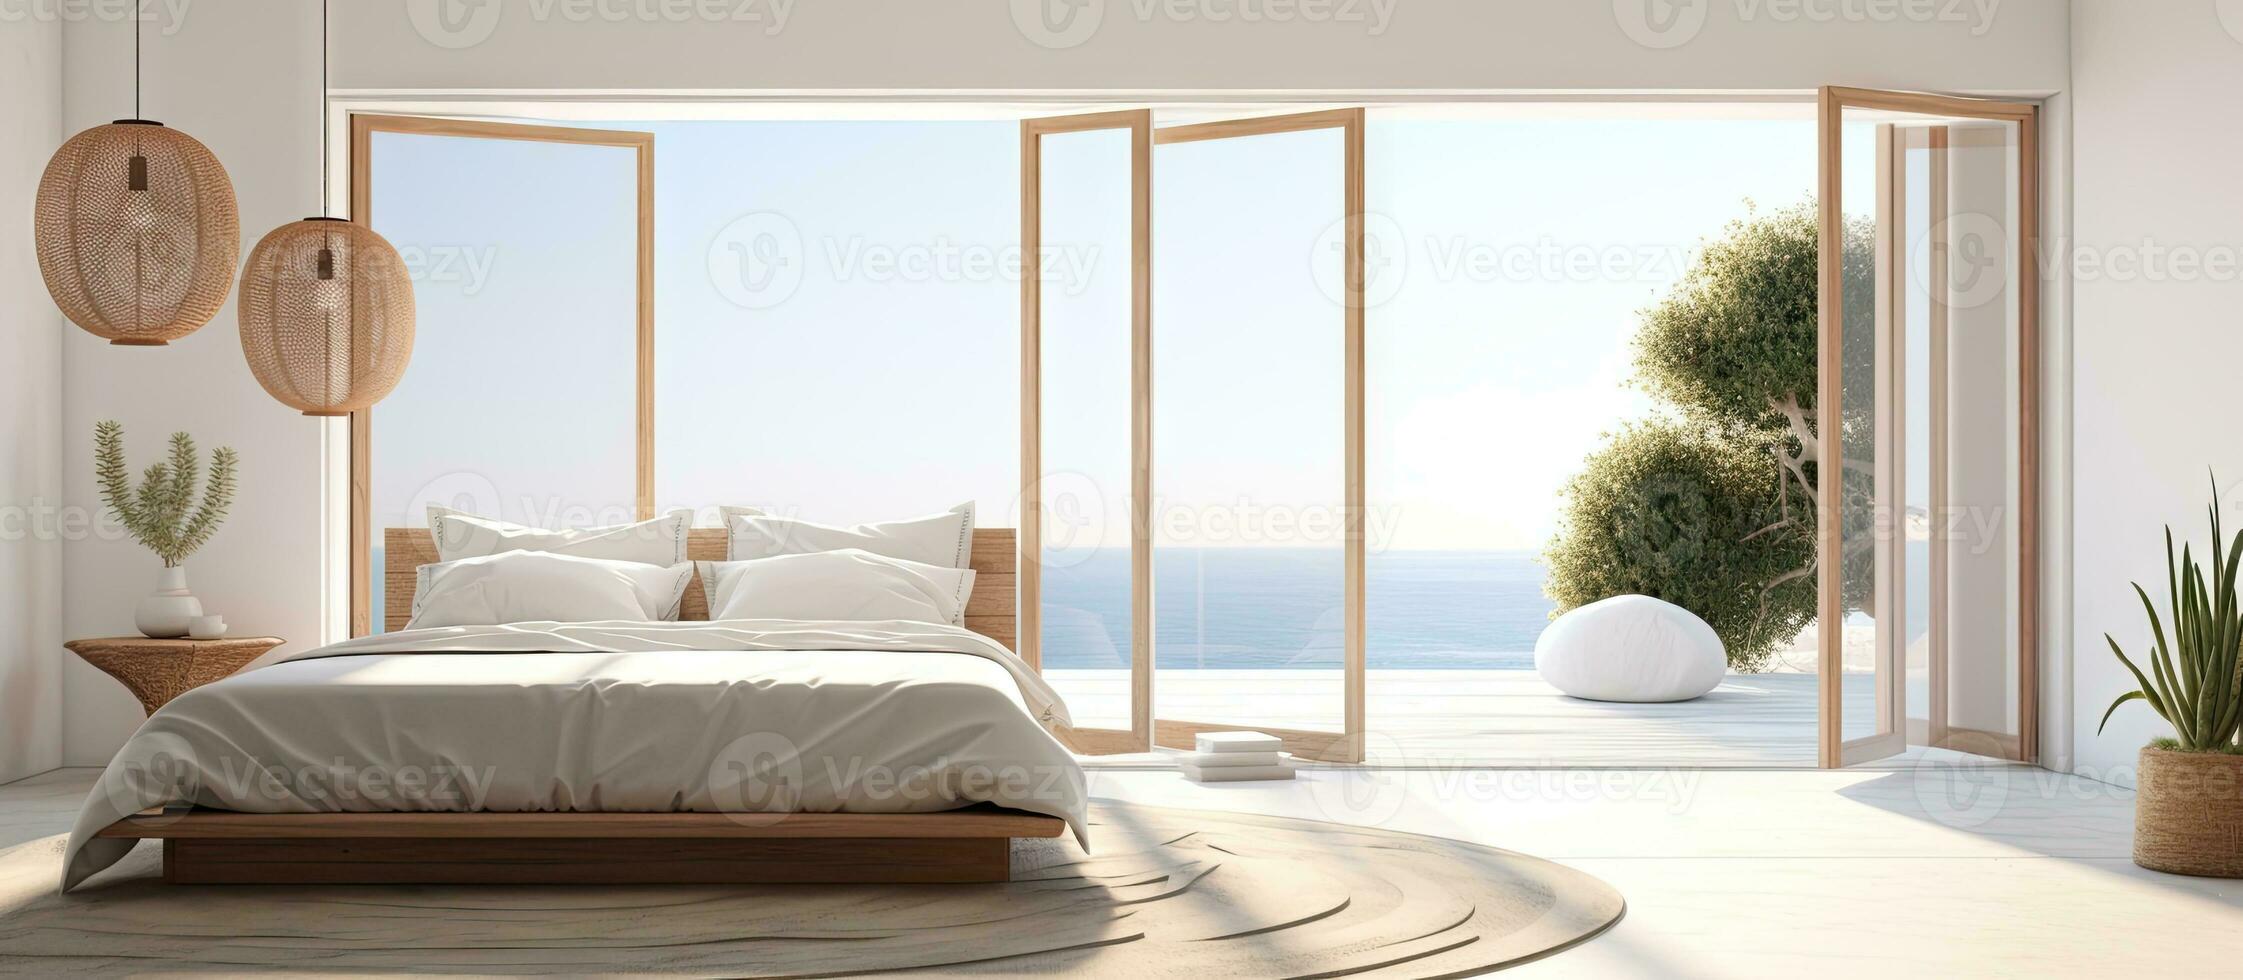 Round hanging lamps over a cozy bed in a bedroom with white walls and a door to terrace photo